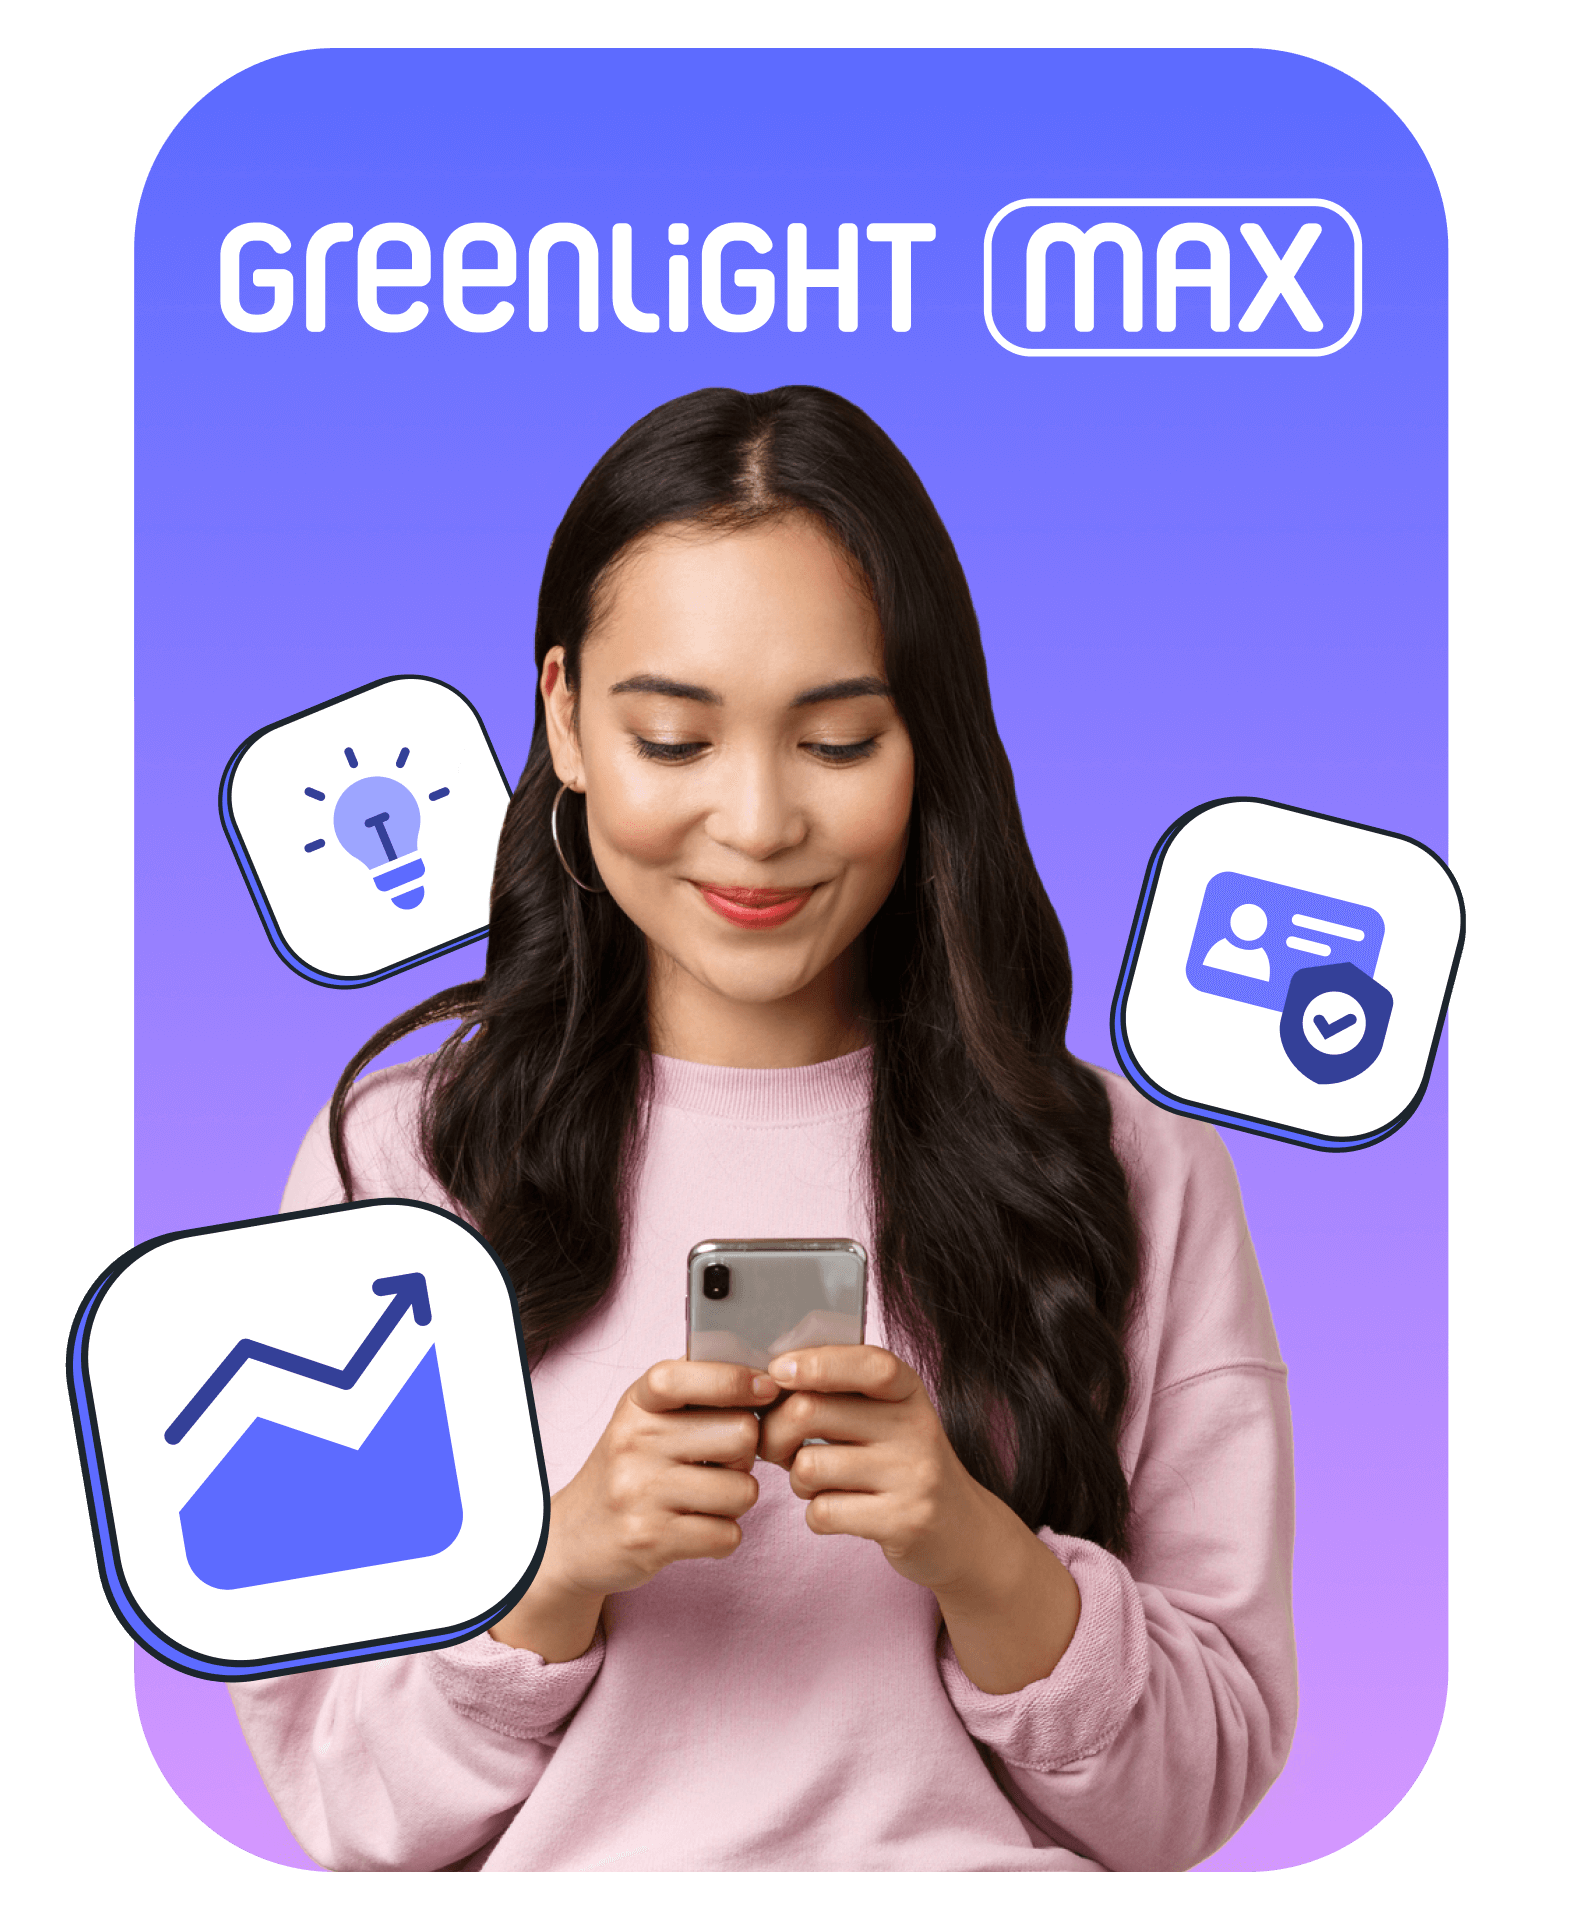 Teenager using the new Greenlight Max plan on mobile to invest securely with identity theft protection.